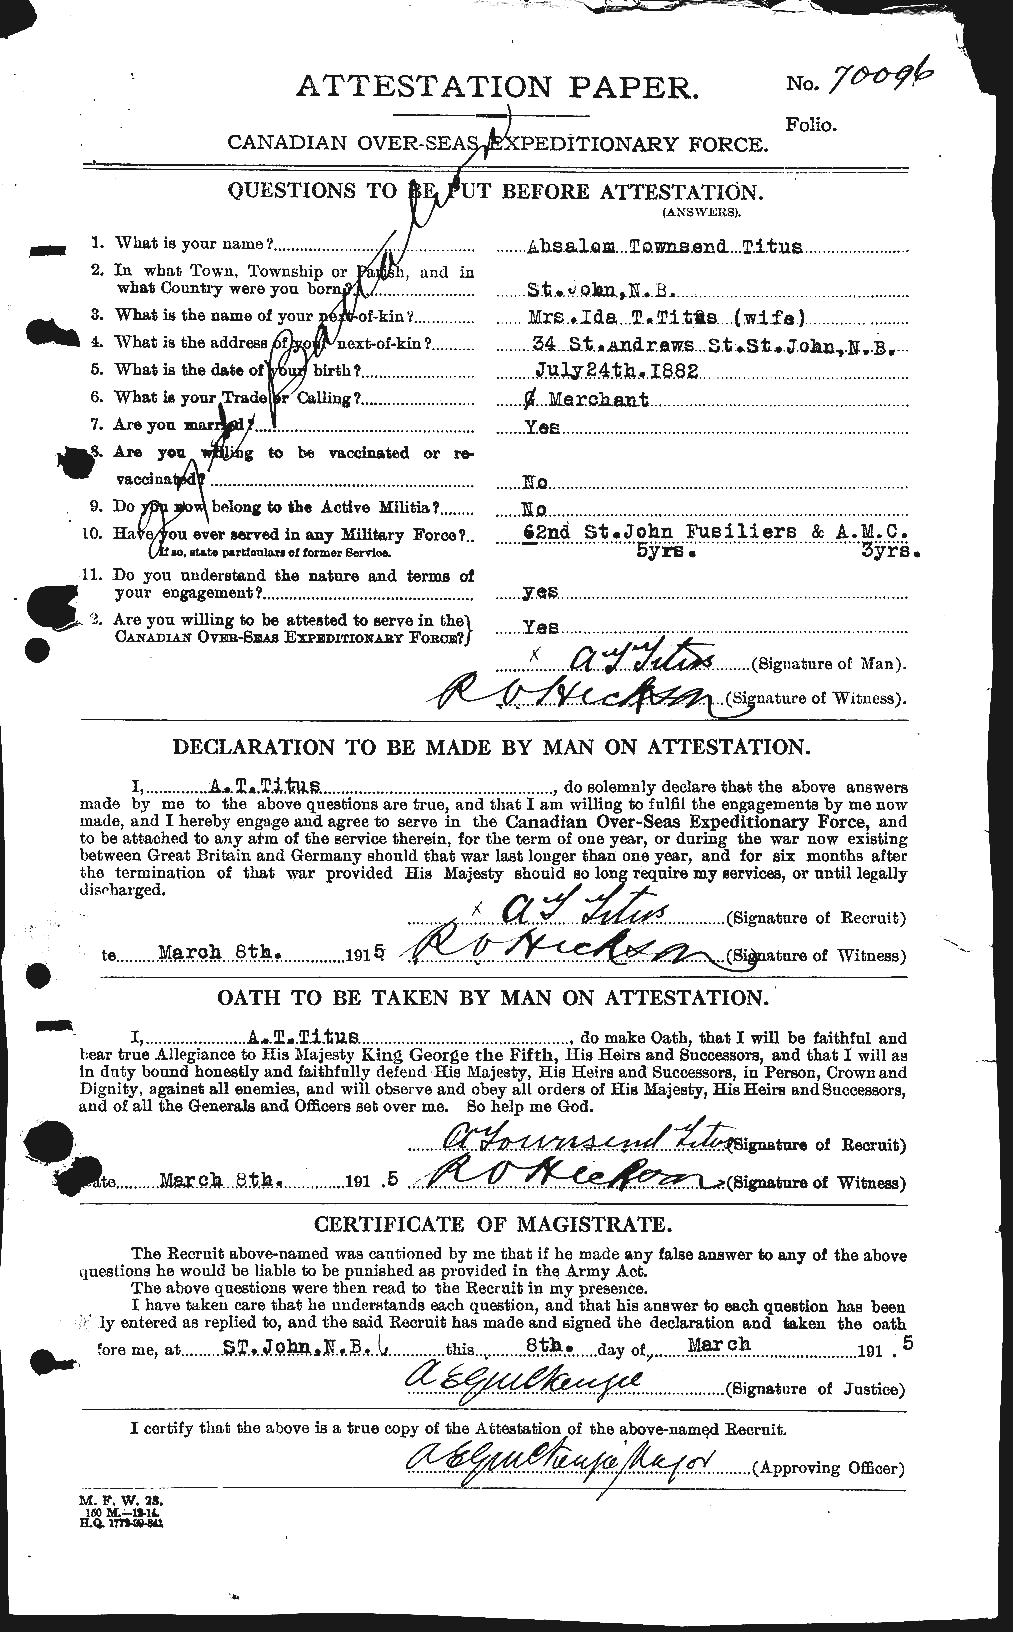 Personnel Records of the First World War - CEF 634947a